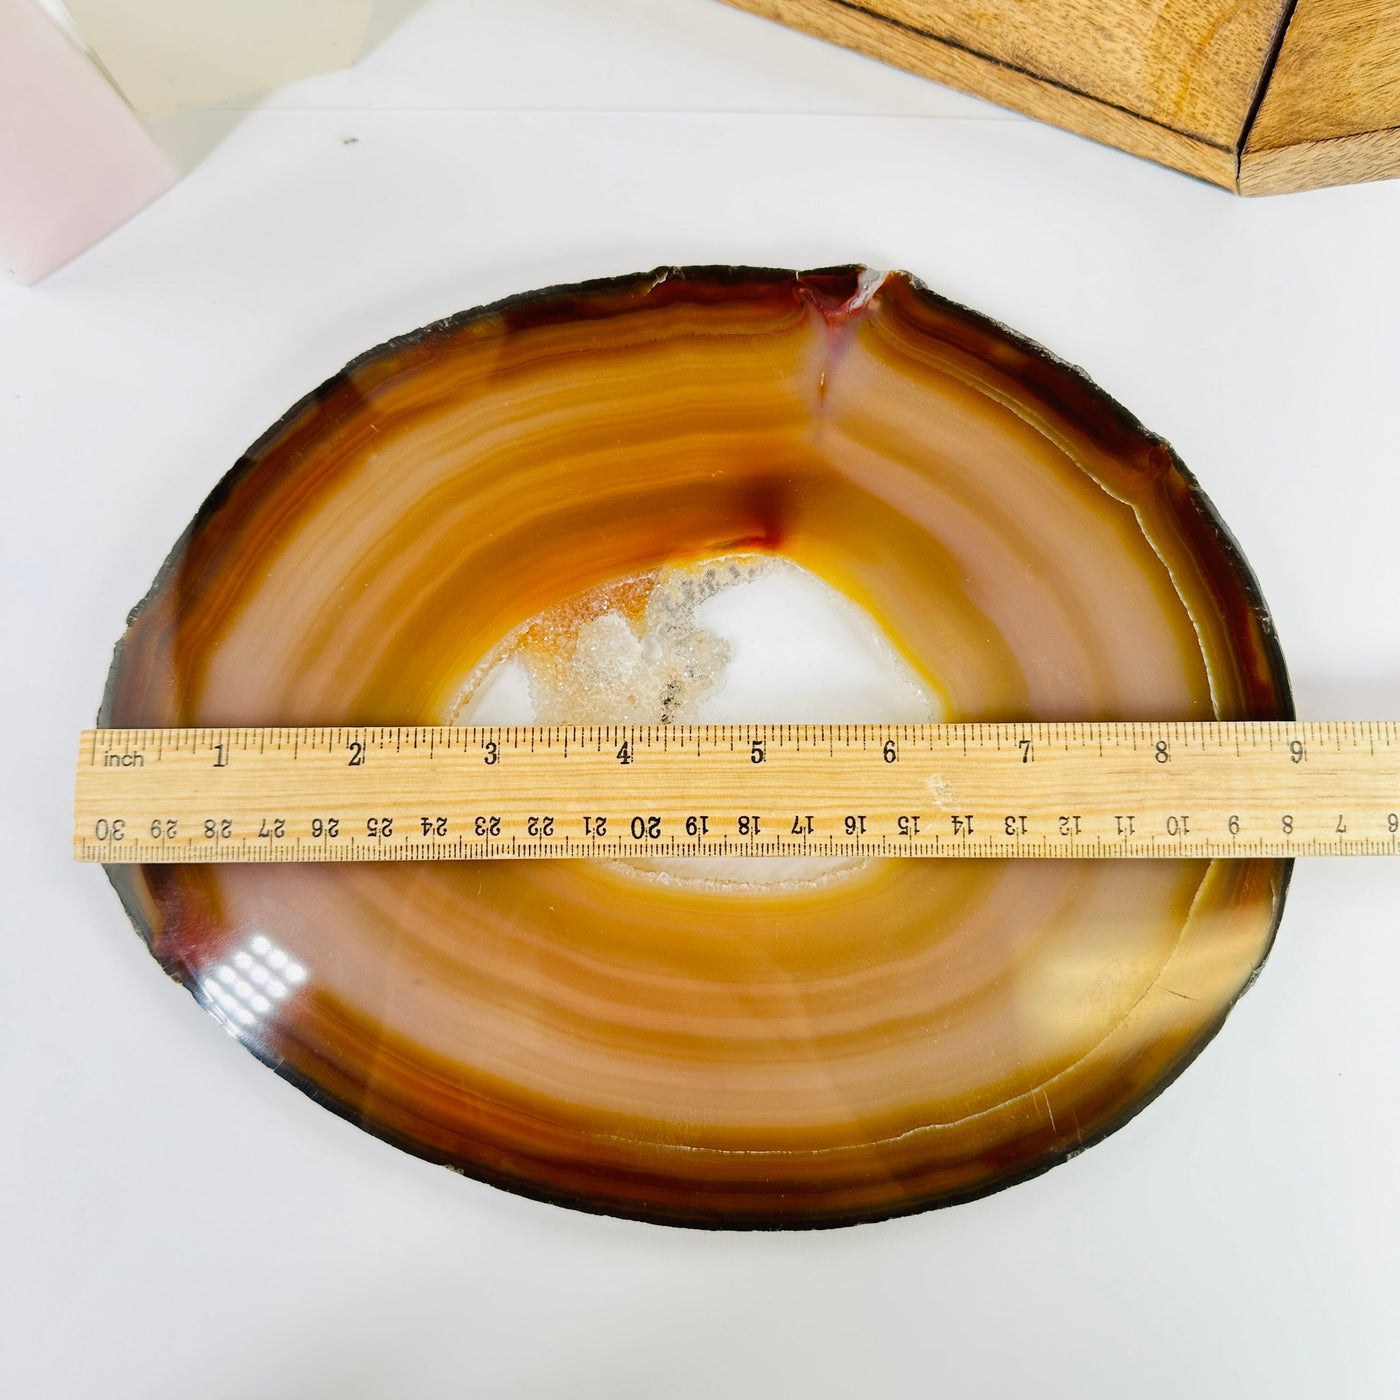 agate slice next to a ruler for size reference